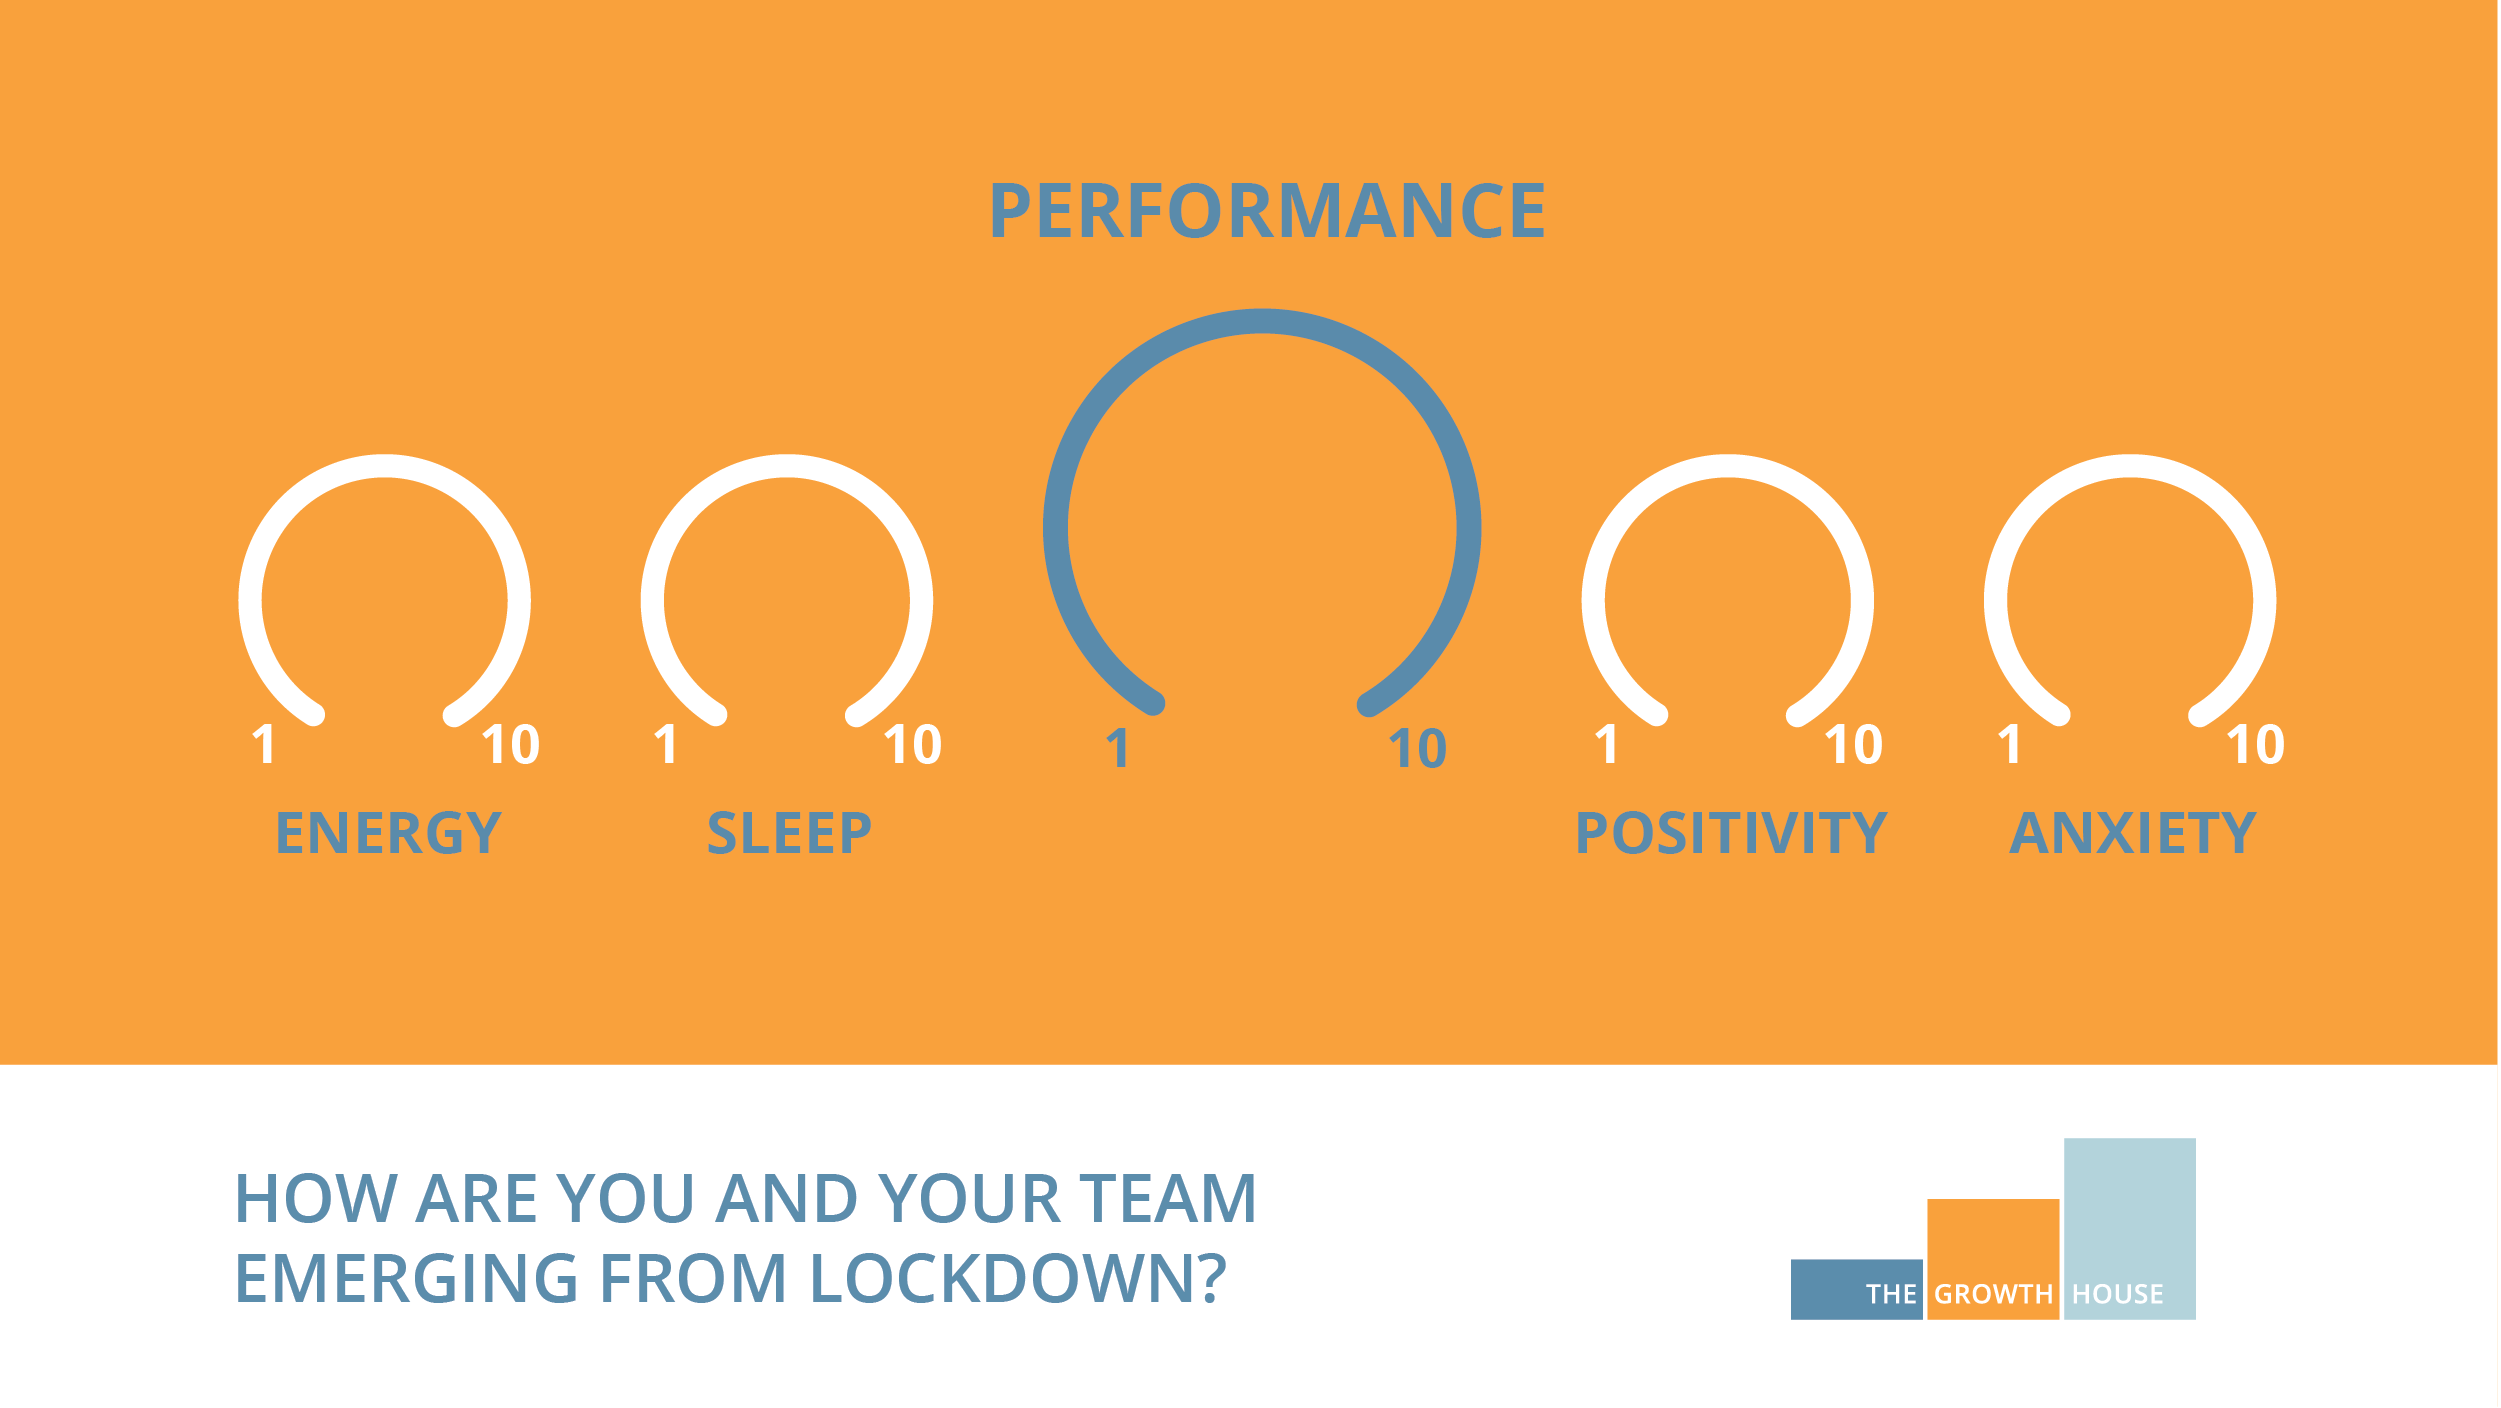 How are you and your team emerging from lockdown